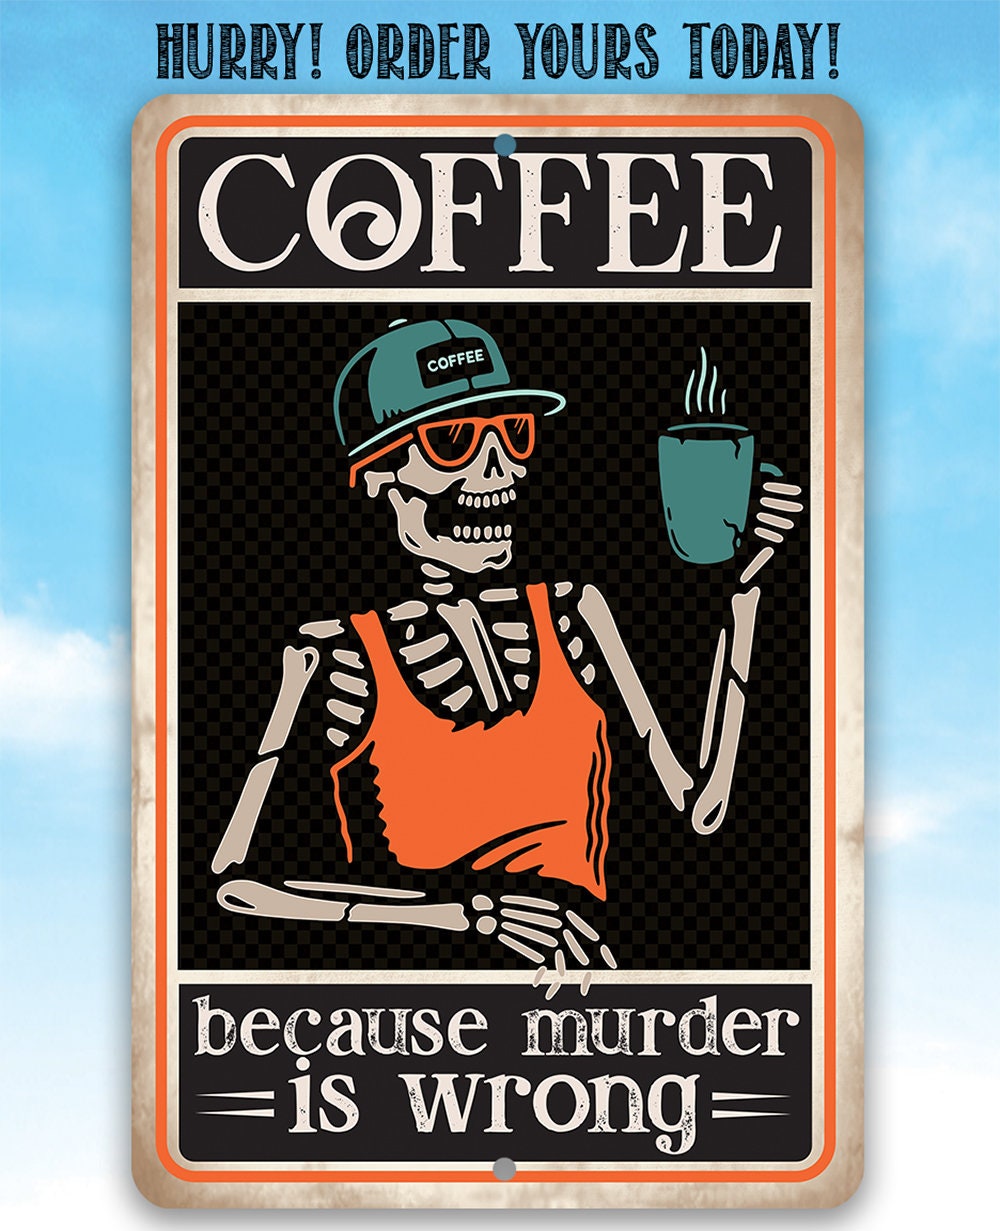 Coffee Because Murder Is Wrong - 8" x 12" or 12" x 18" Aluminum Tin Awesome Metal Poster Lone Star Art 